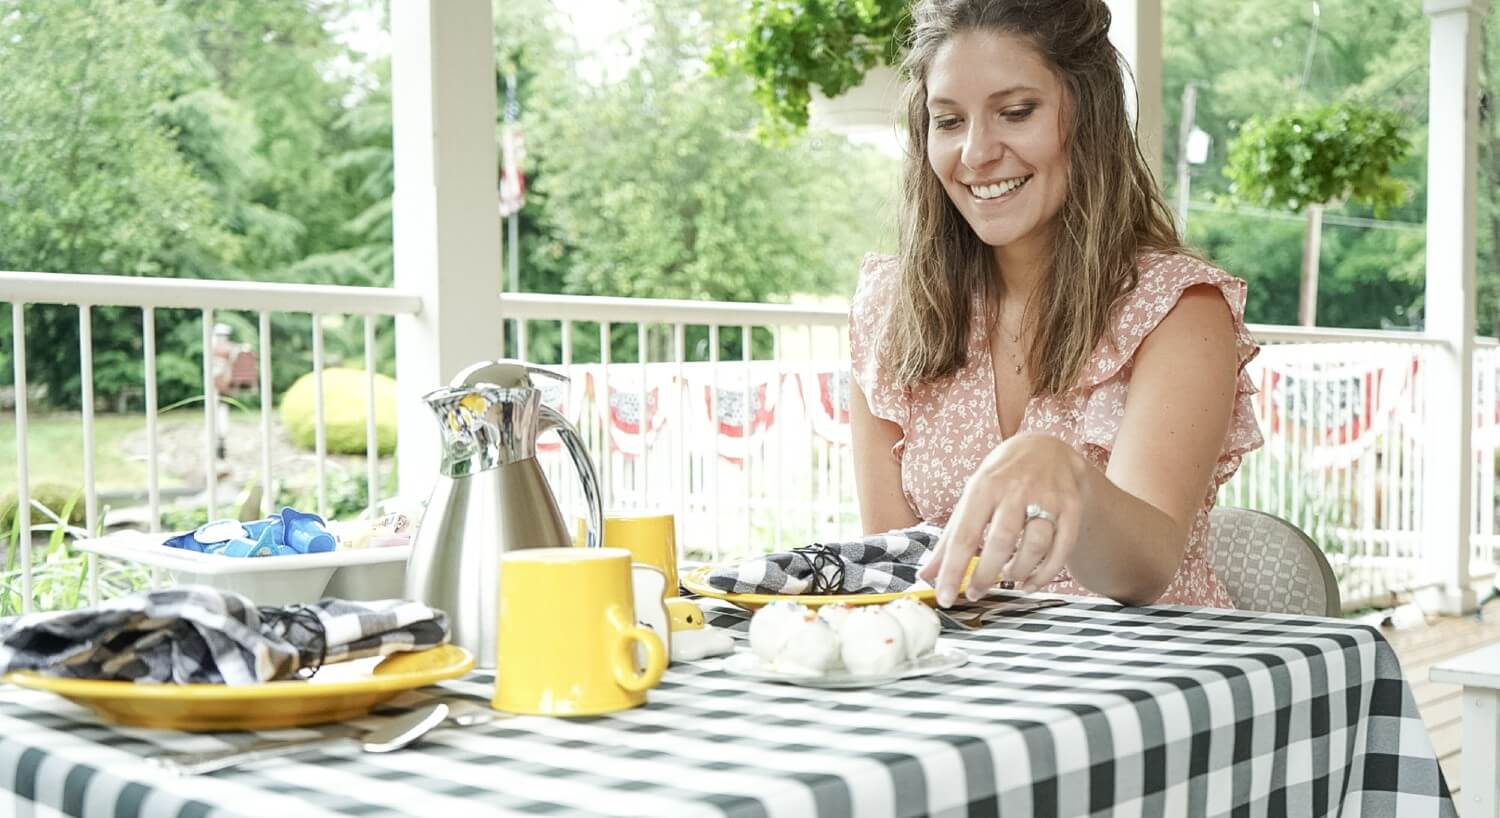 A smiling woman sitting at a table for two on an outside deck with trees in the background